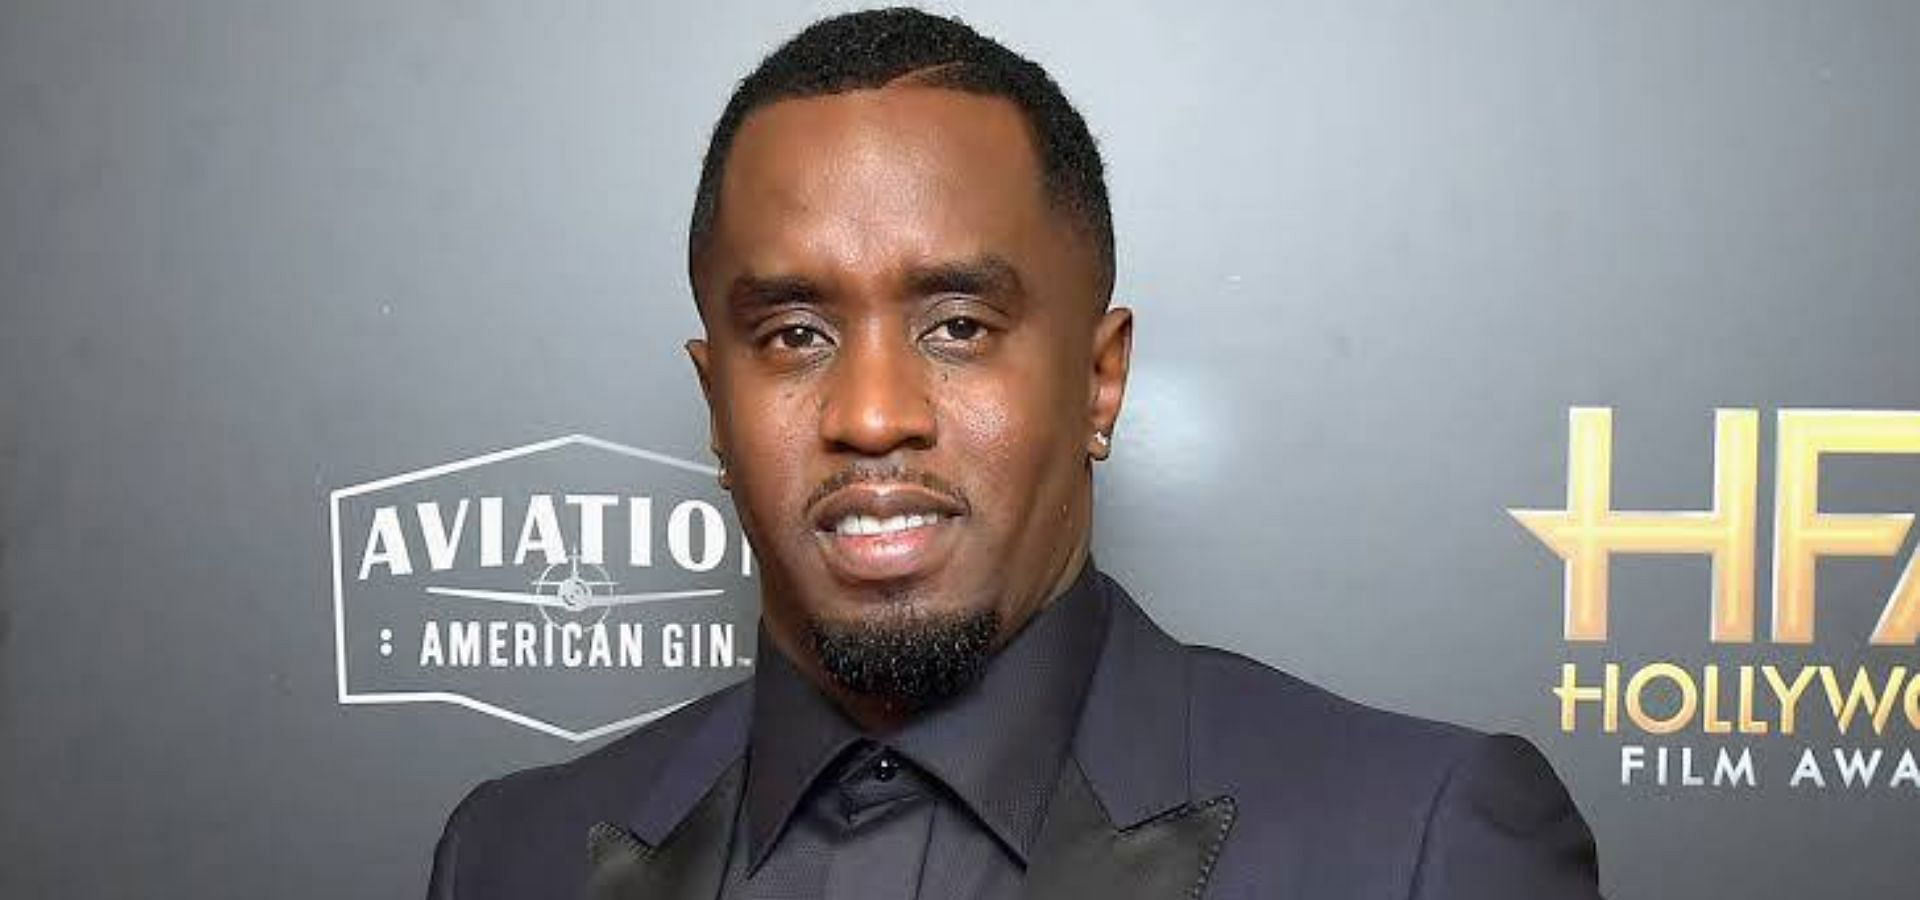 Sean Diddy Combs Hulu Show Diddy 7 Canceled In Light Of Assault Allegations